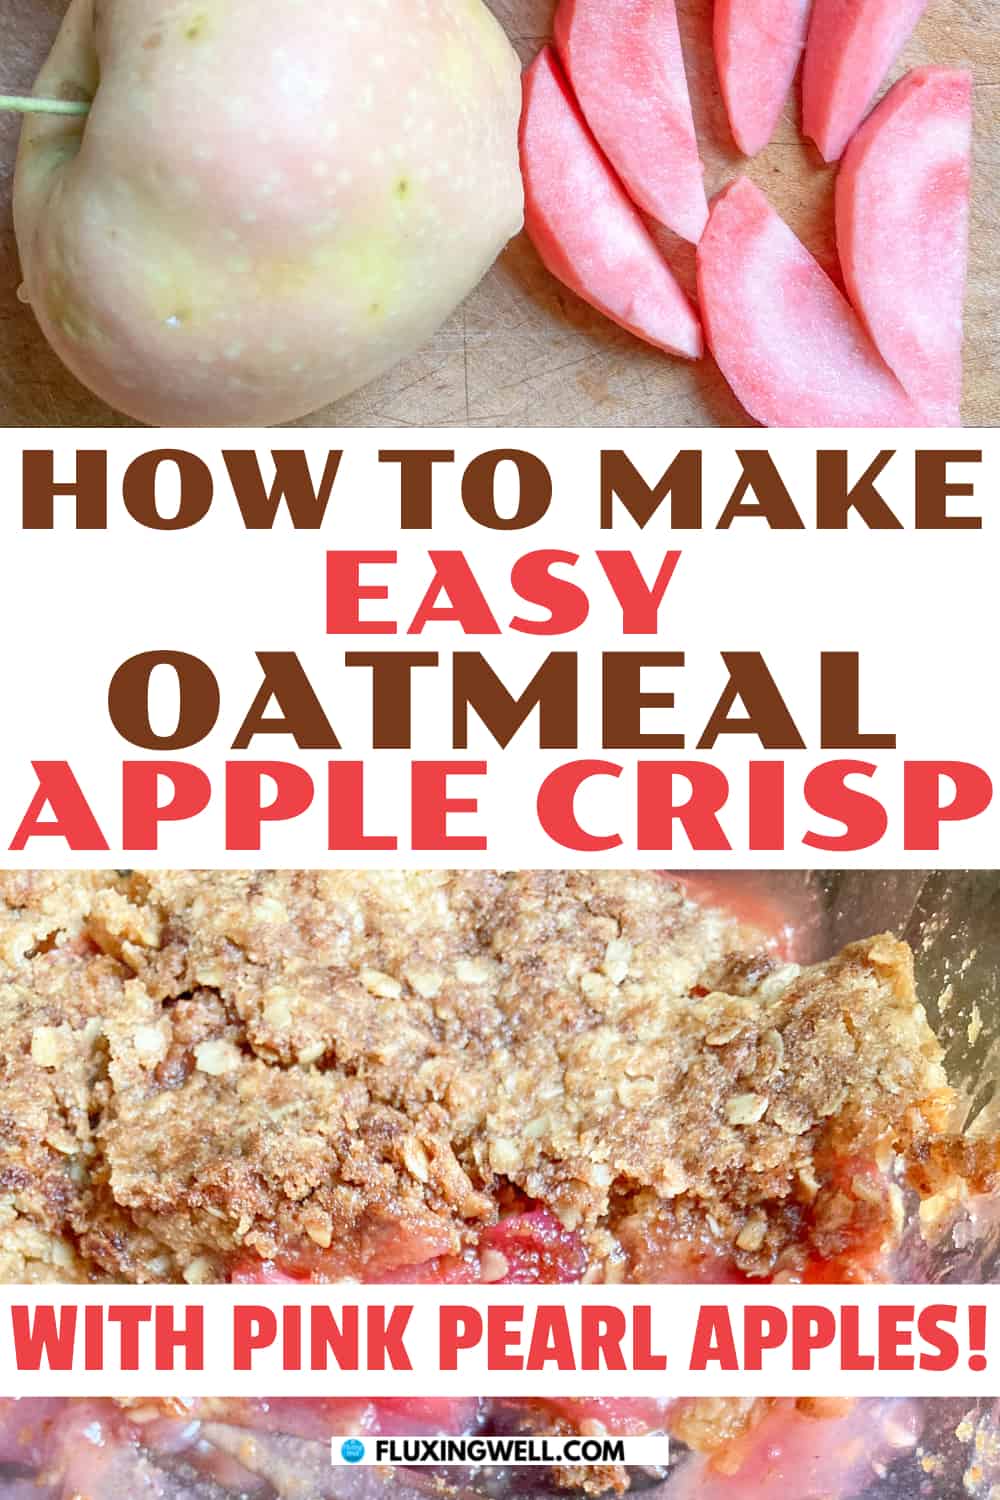 how to make easy oatmeal apple crisp photo with pink Pearl apples on top and the baked oatmeal apple crisp on the bottom